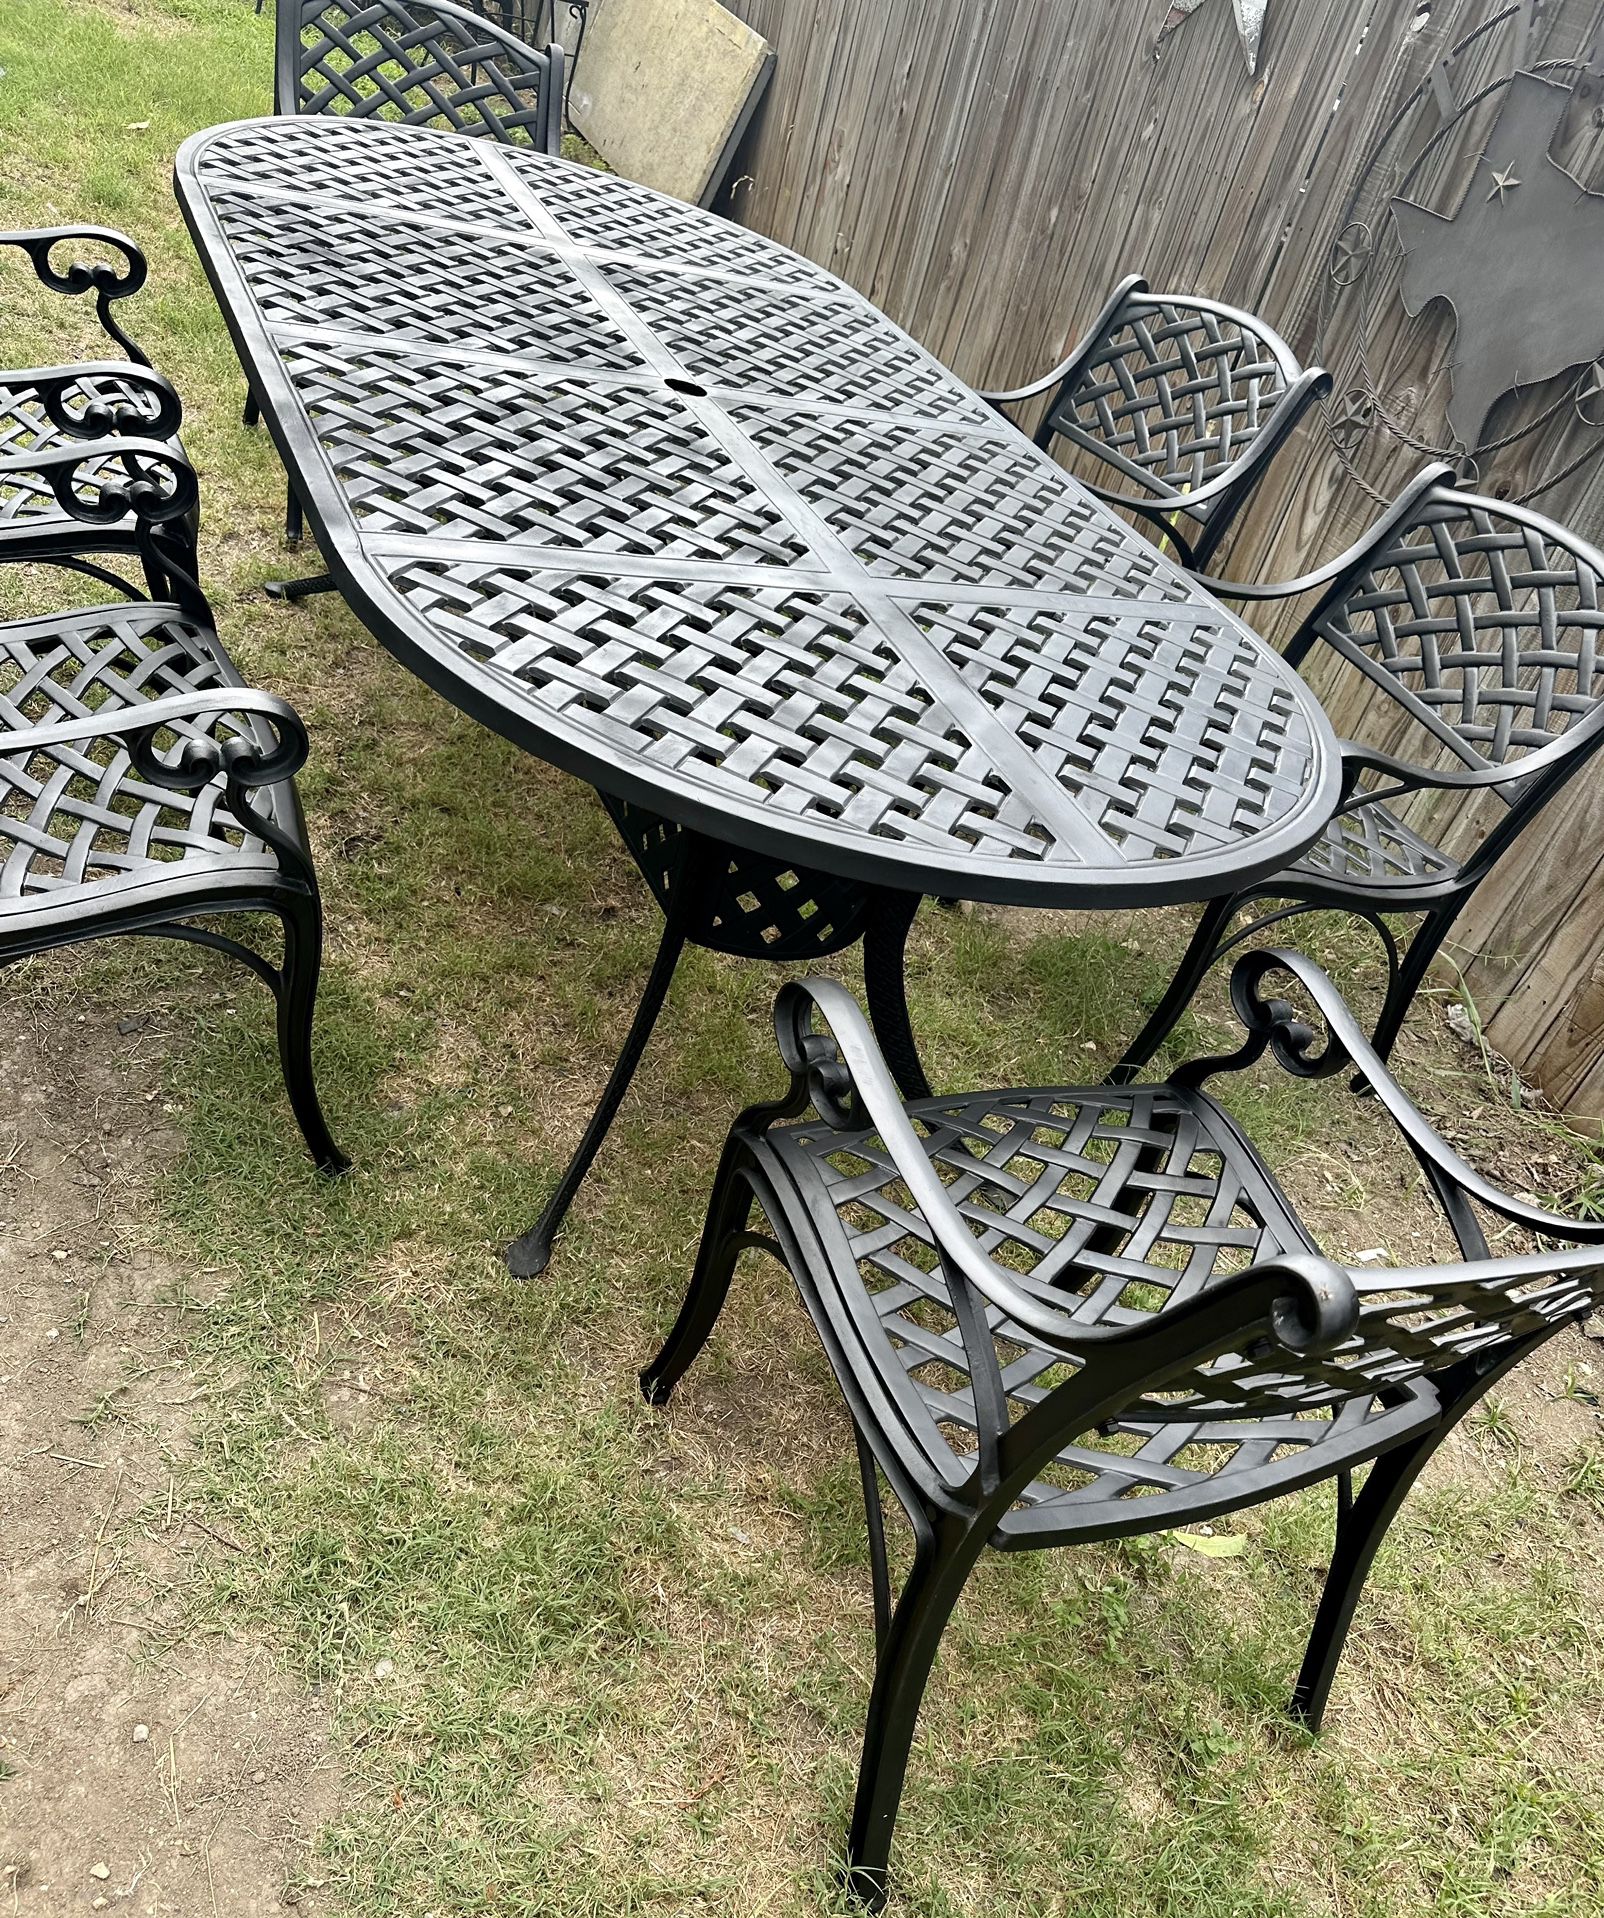 7 Pc Hanamint Cast Iron Patio Set, Large Table And 6 Regular Chairs , All Set Really Heavy And Sturdy, Excellent Conditions $870